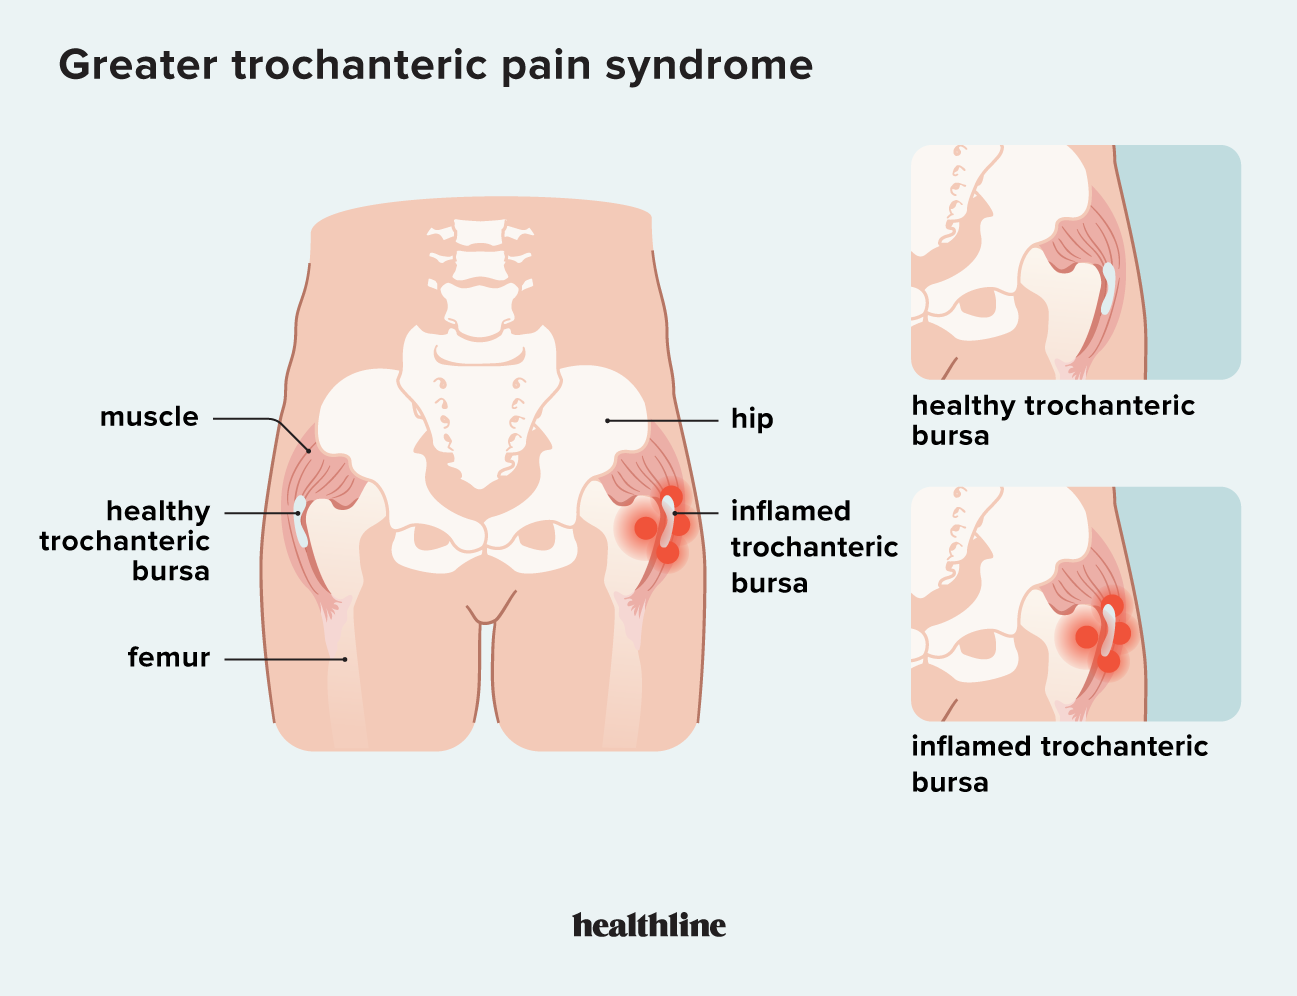 https://post.healthline.com/wp-content/uploads/2023/03/2729063-Treating-Greater-Trochanteric-Pain-Syndrome-1296x728-header-body-1.png